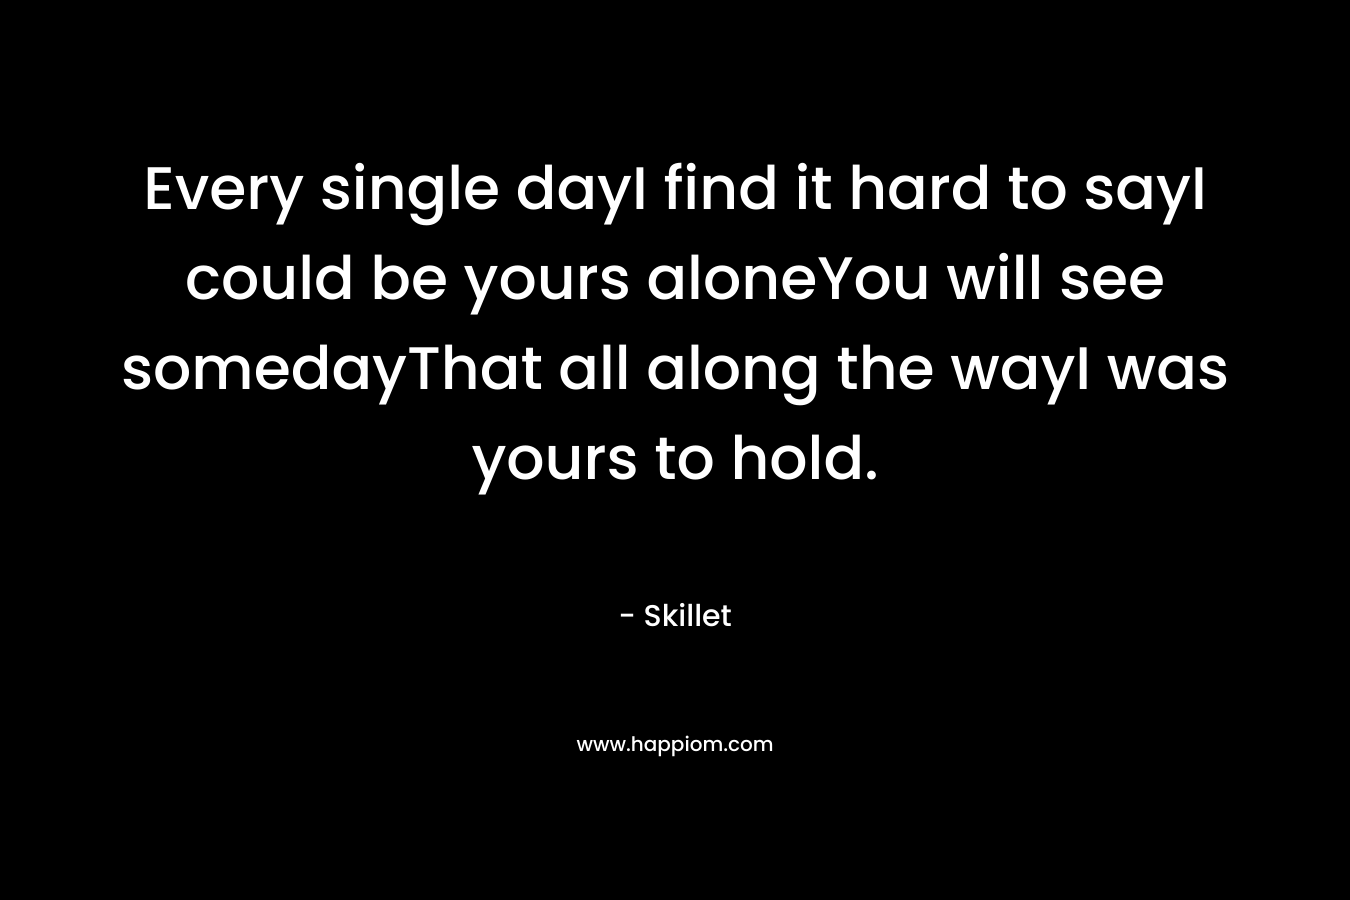 Every single dayI find it hard to sayI could be yours aloneYou will see somedayThat all along the wayI was yours to hold. – Skillet